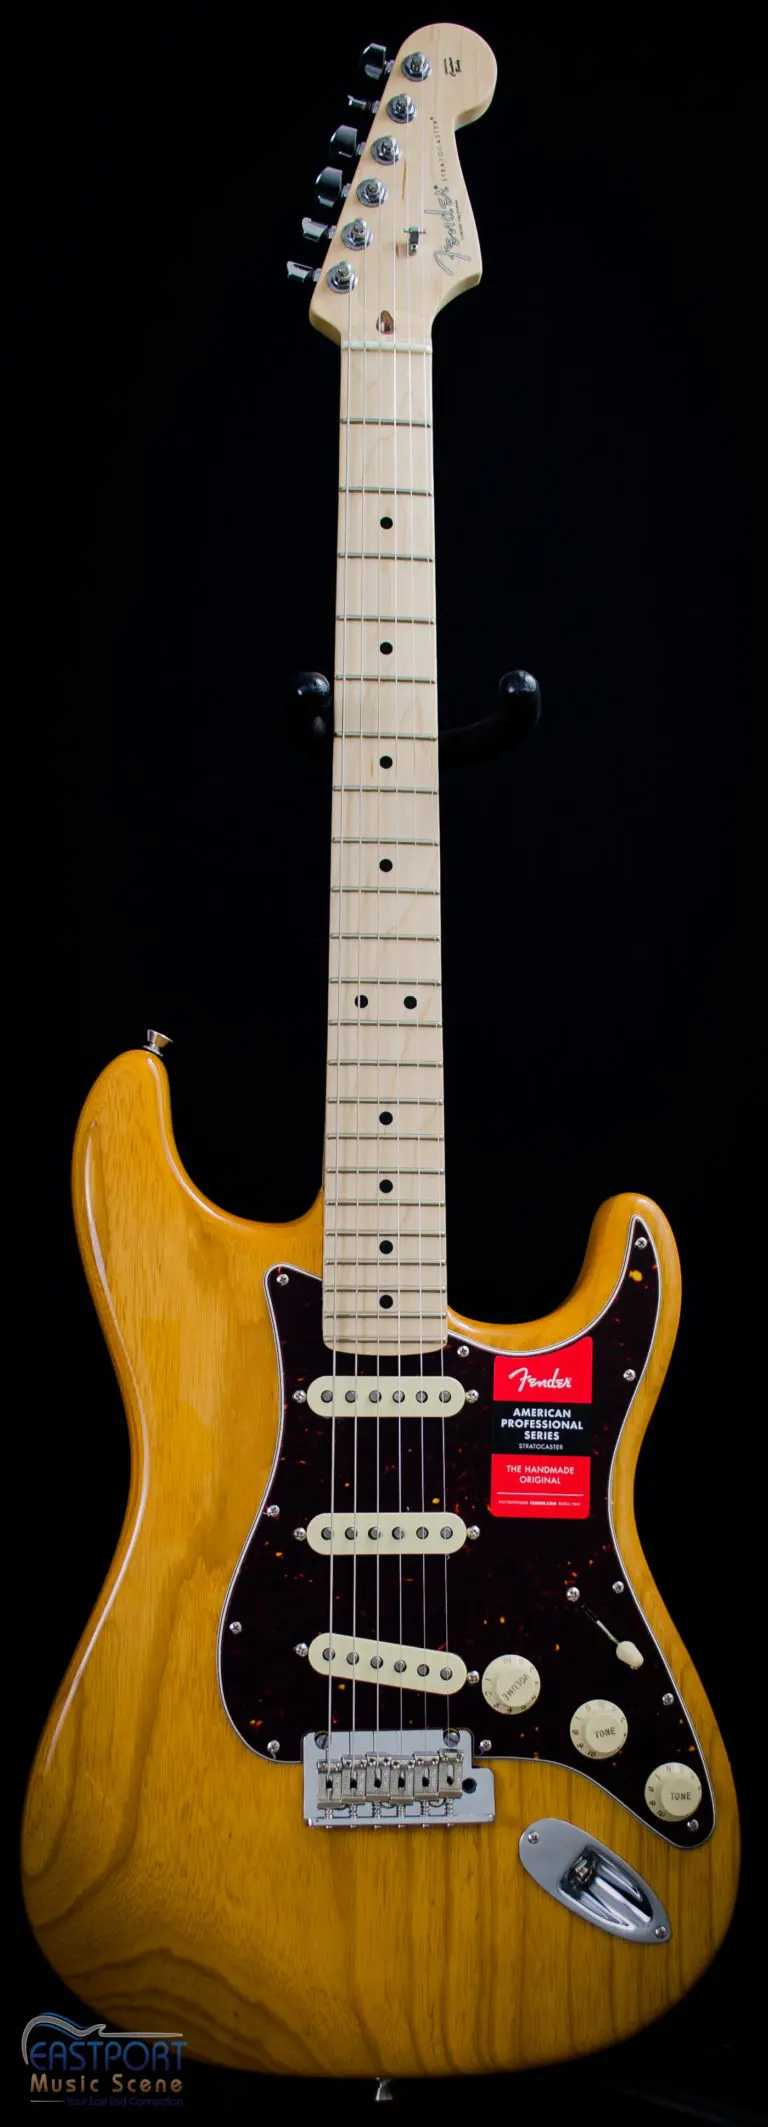 A yellow electric guitar with black neck and head.